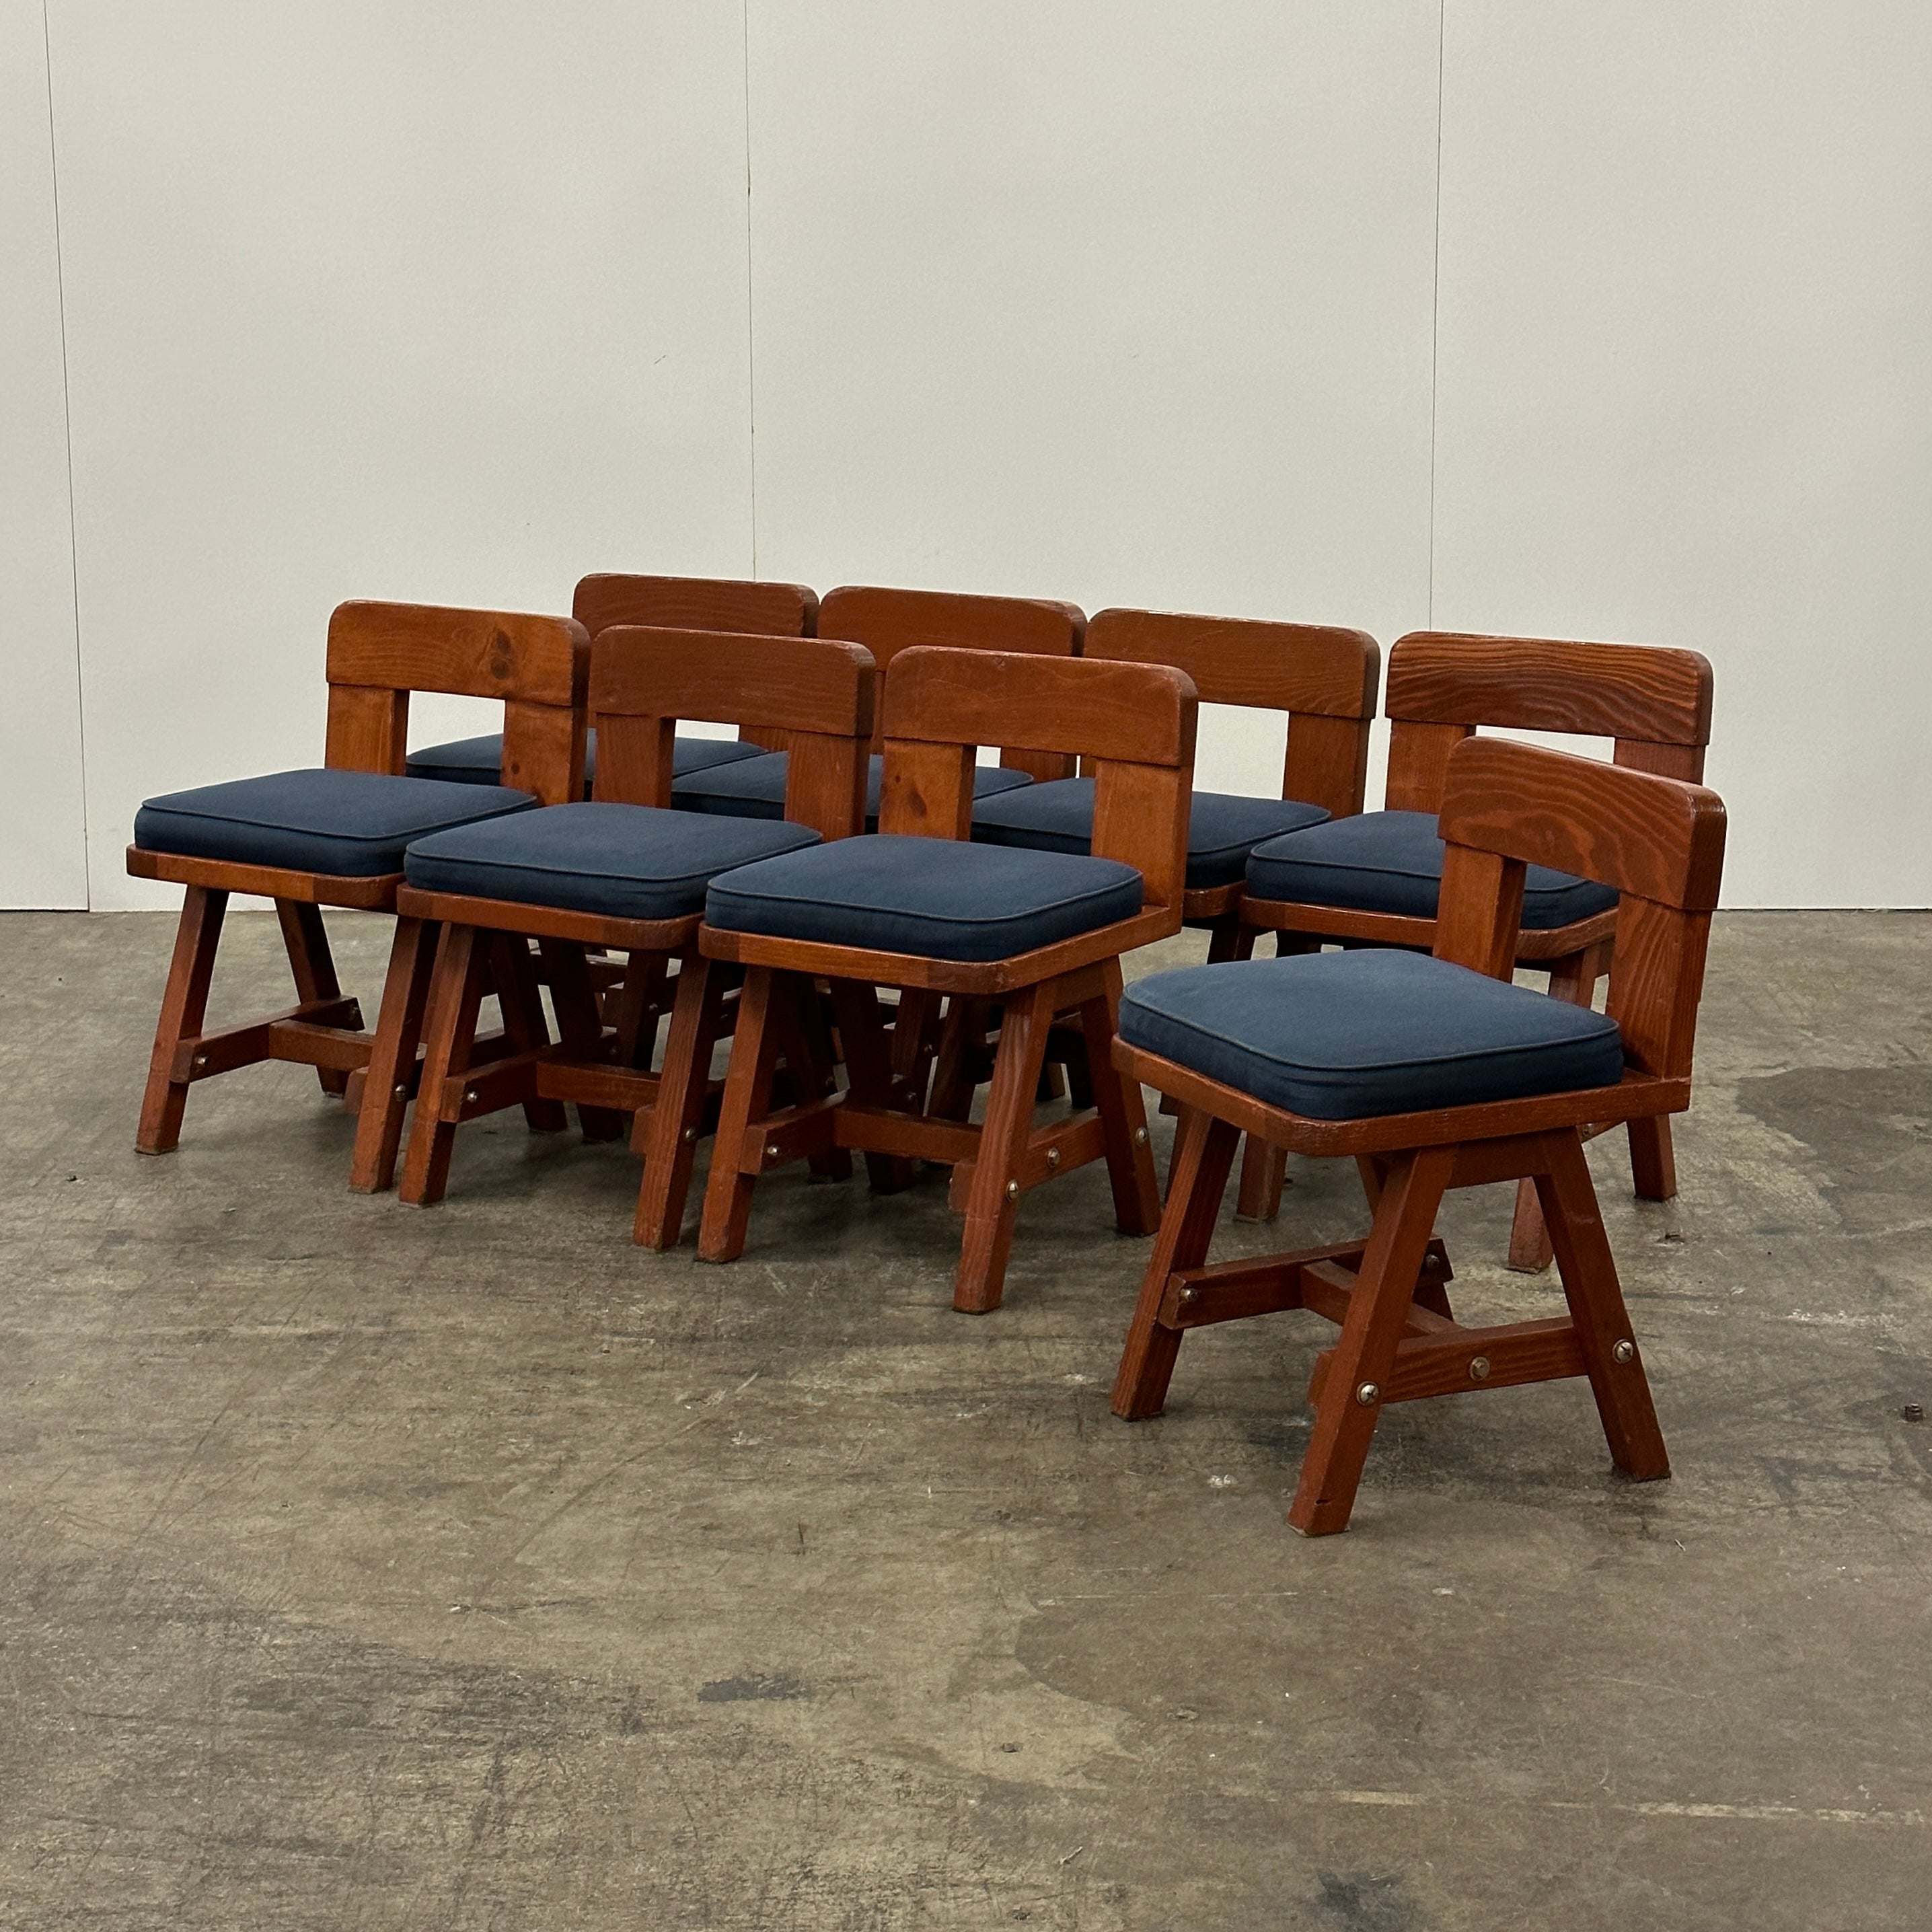 Knotty Pine Low Back Dining Chairs from The Chicago Athletic Association